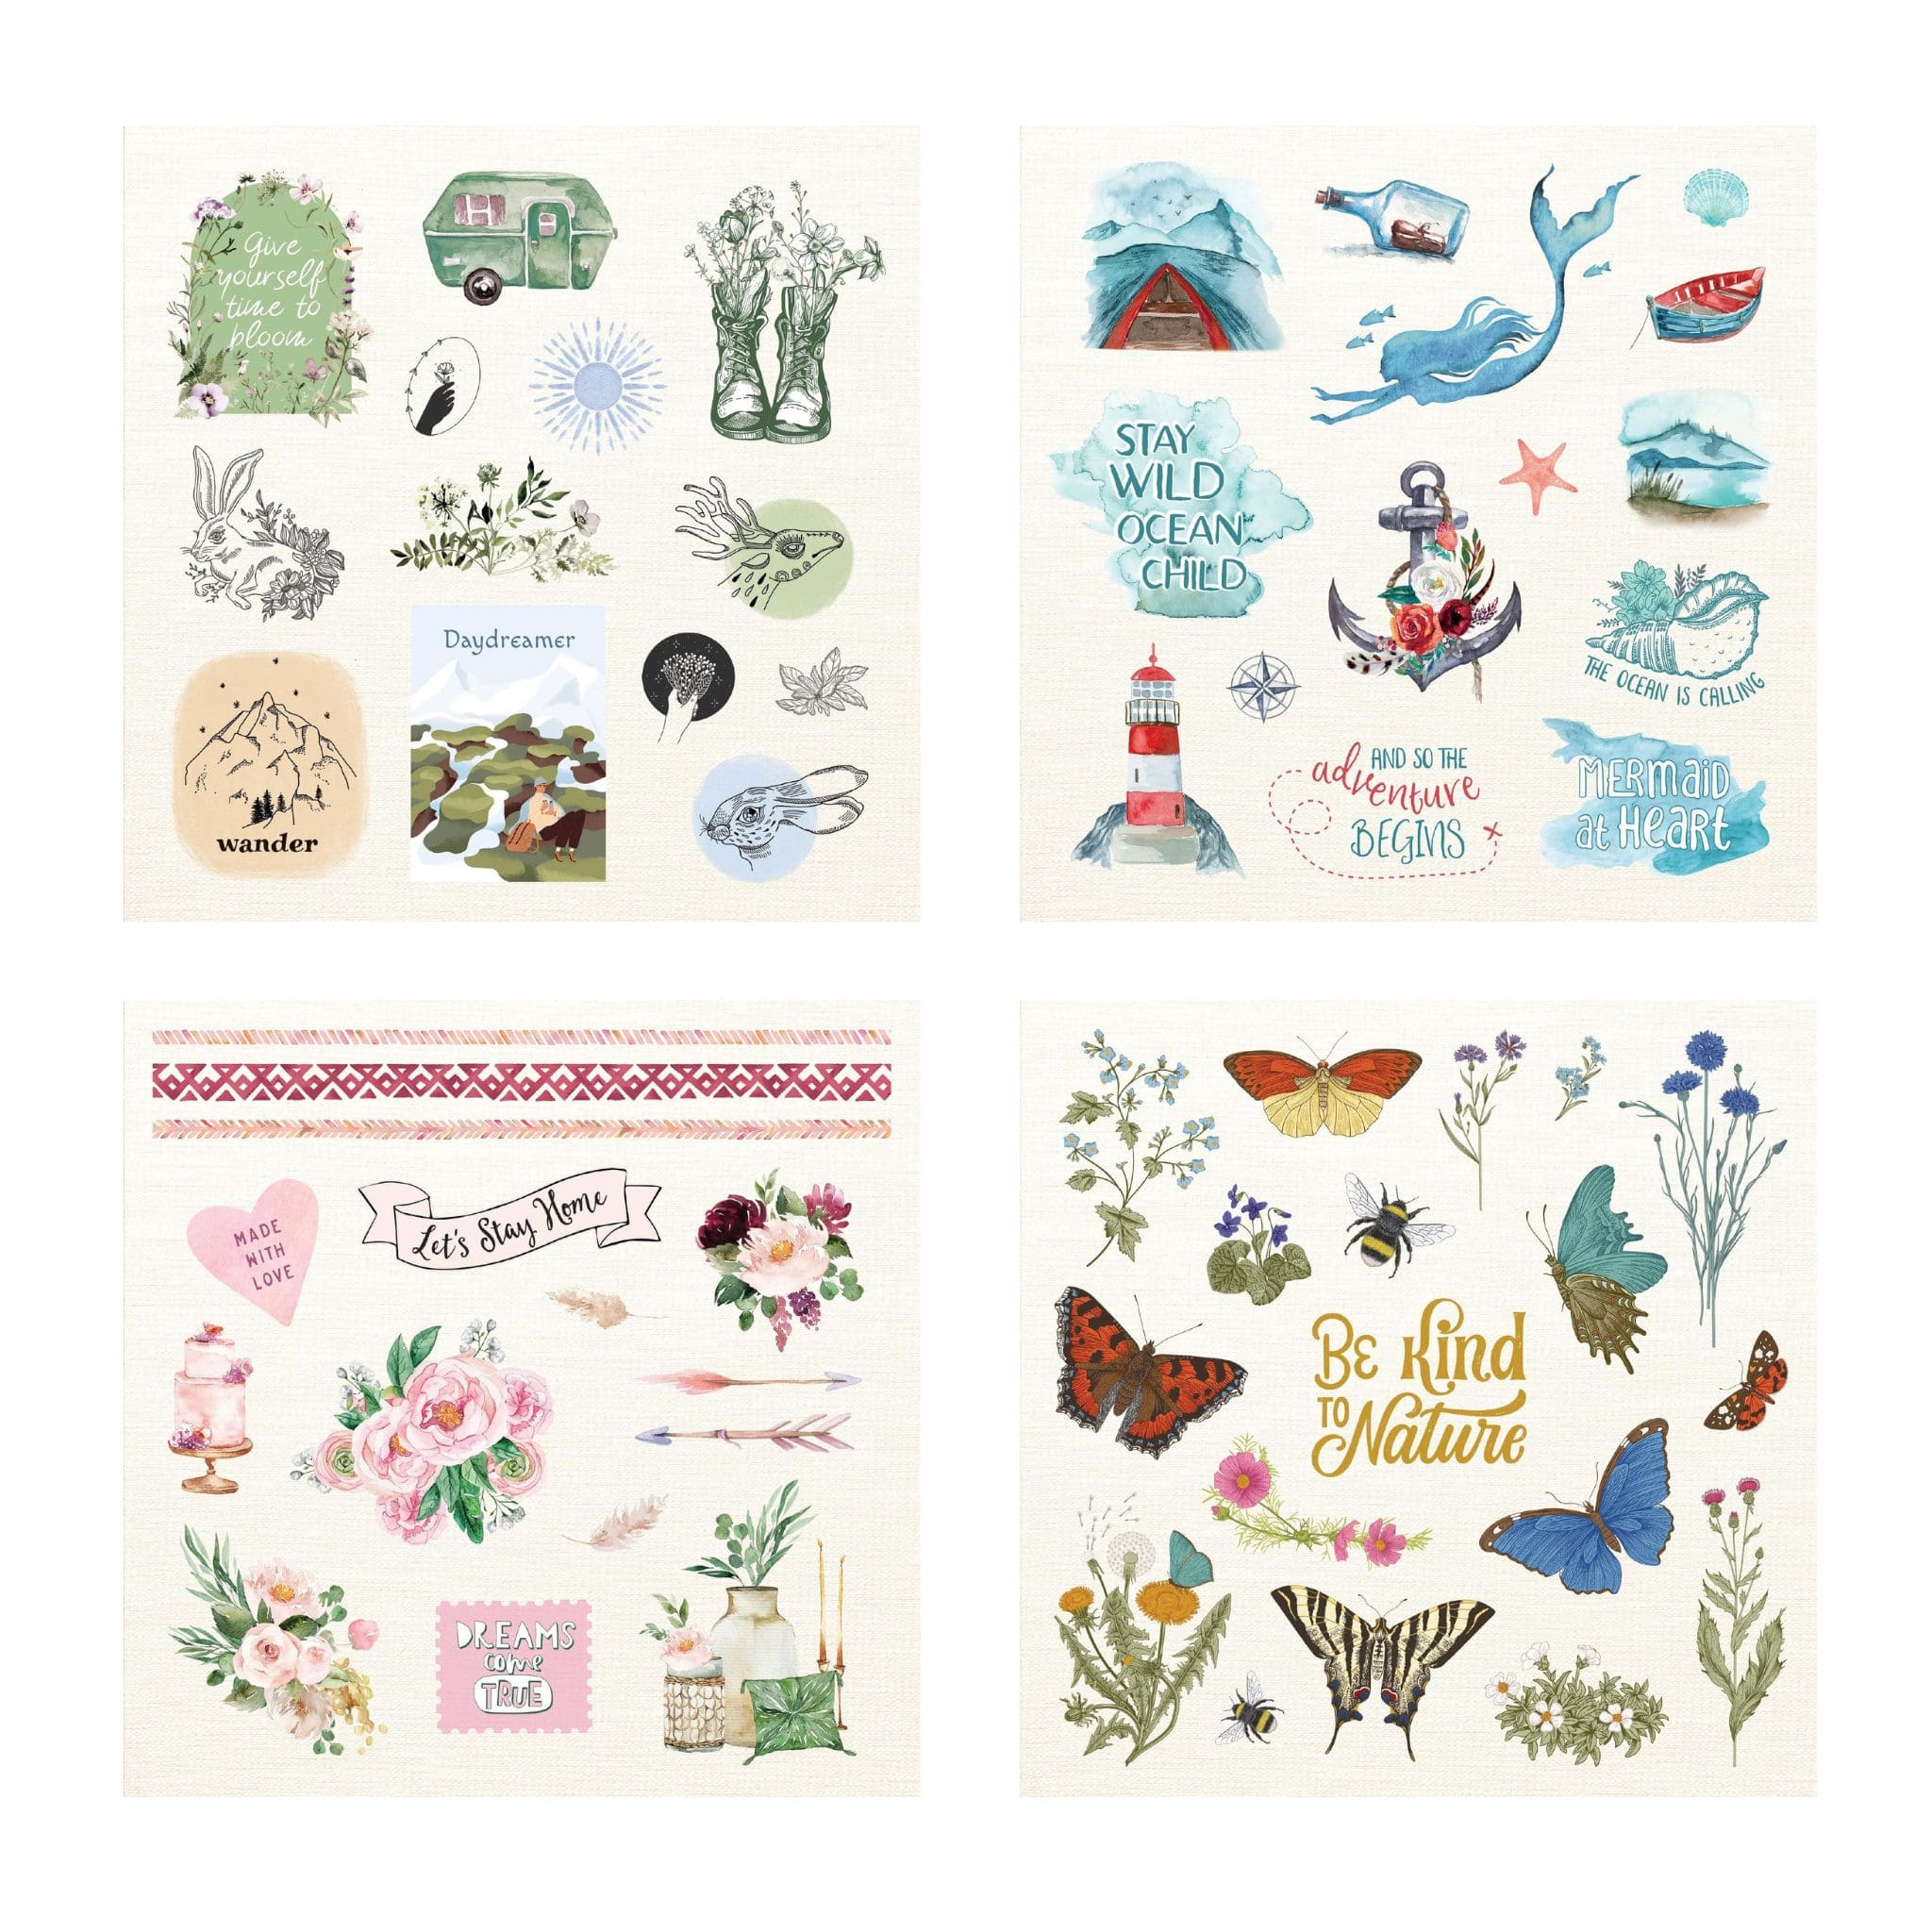 Peter Pauper Press Boho Dreams Sticker Book samples stickers with butterflies forest animals, flowers and sea creatures- Paper Kooka Australia